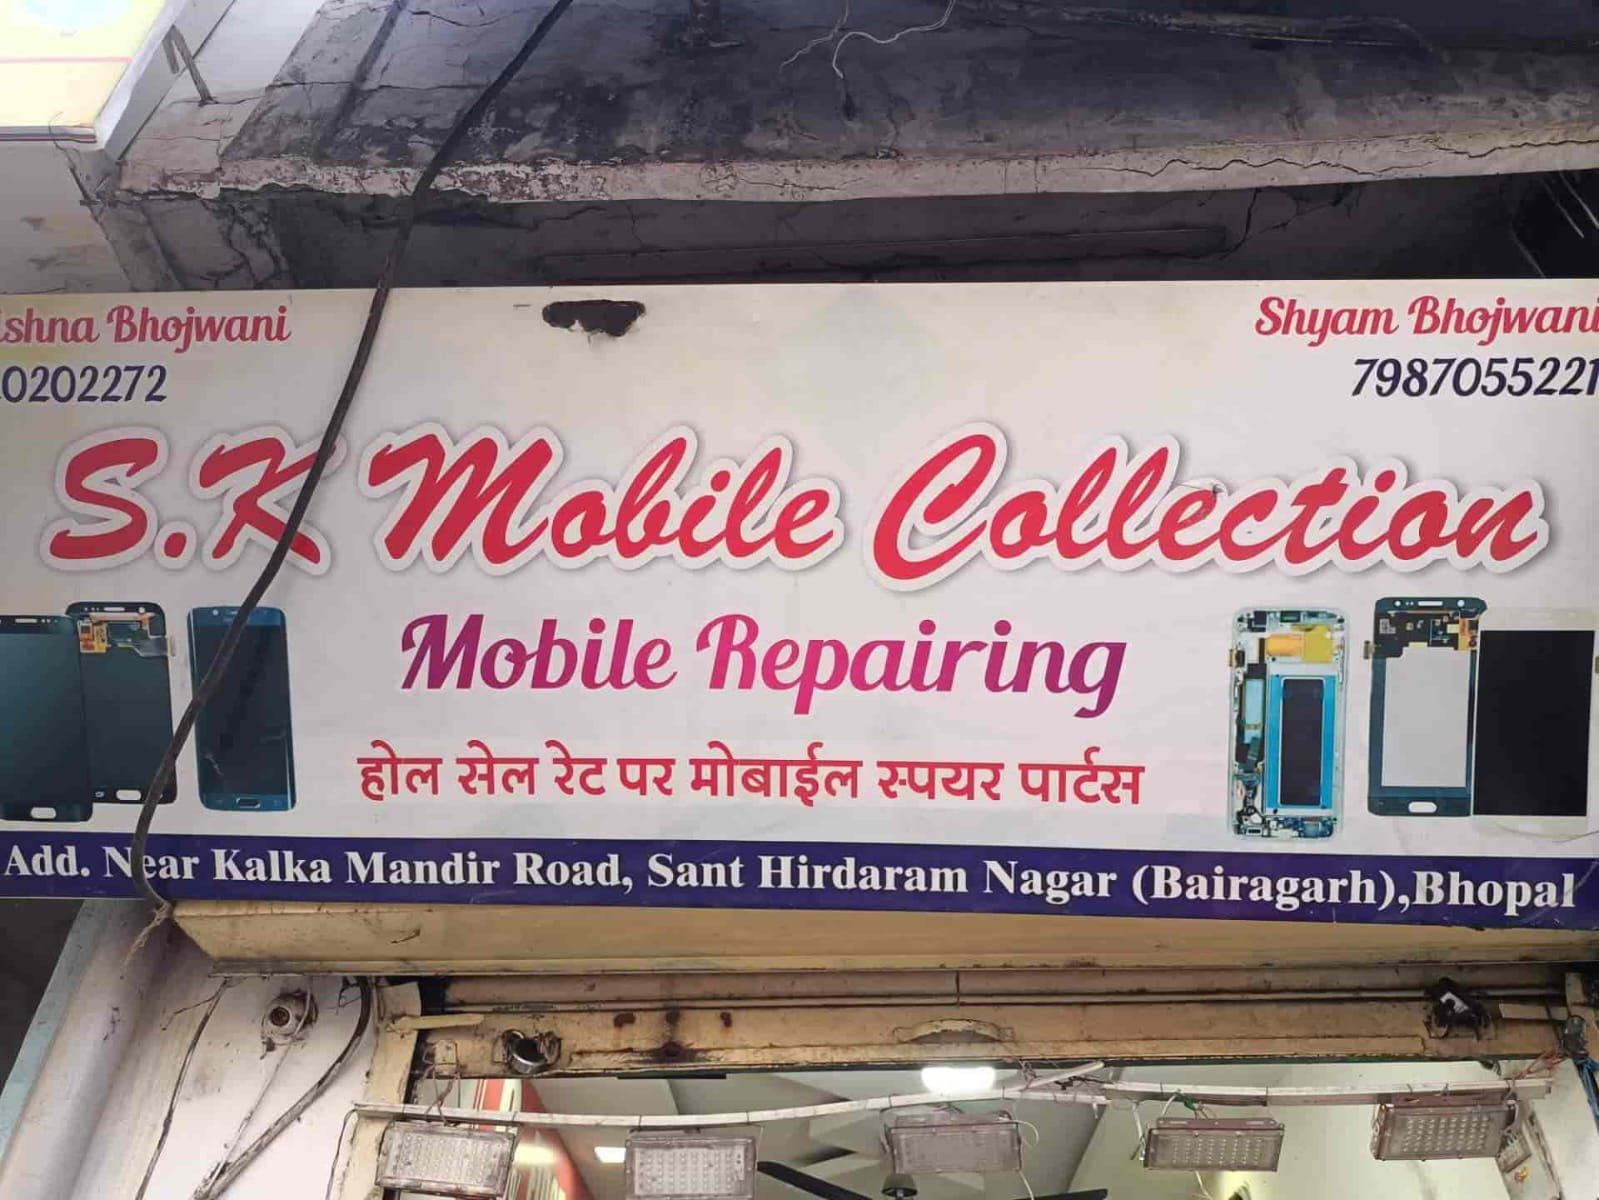 SK Mobile Collections